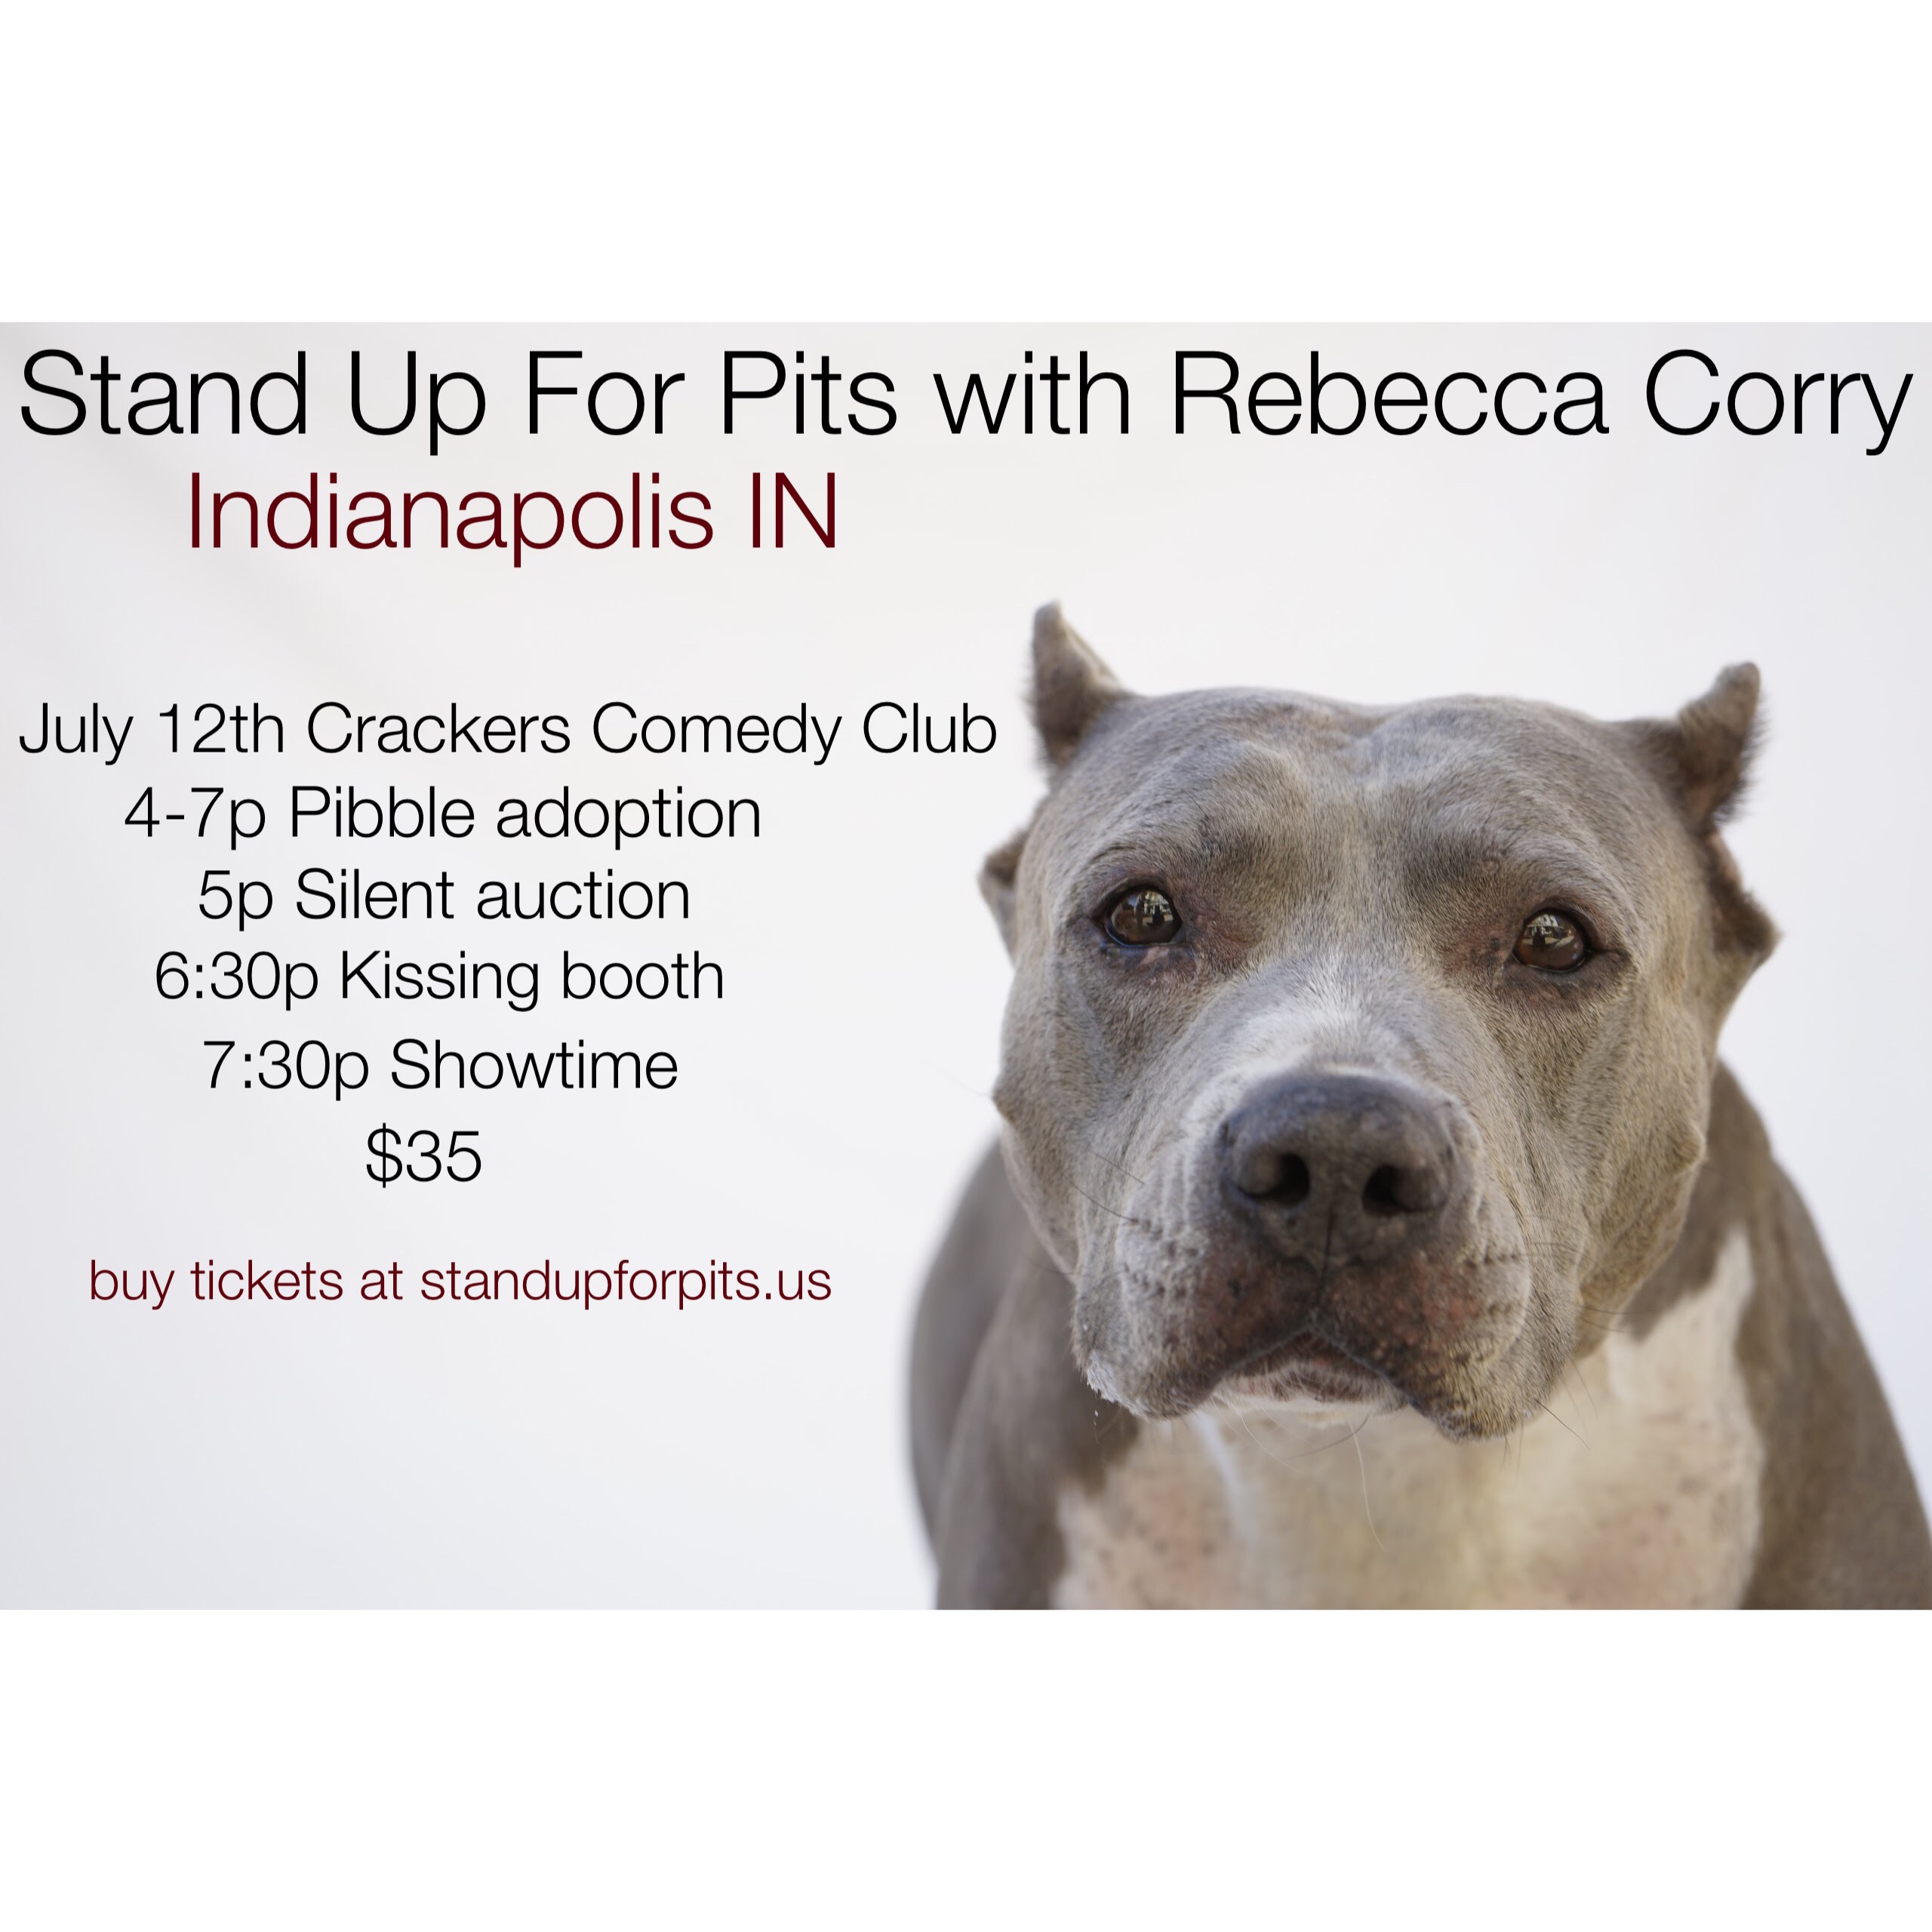 Stand Up For Pits INDIANAPOLIS tix on sale NOW!!!